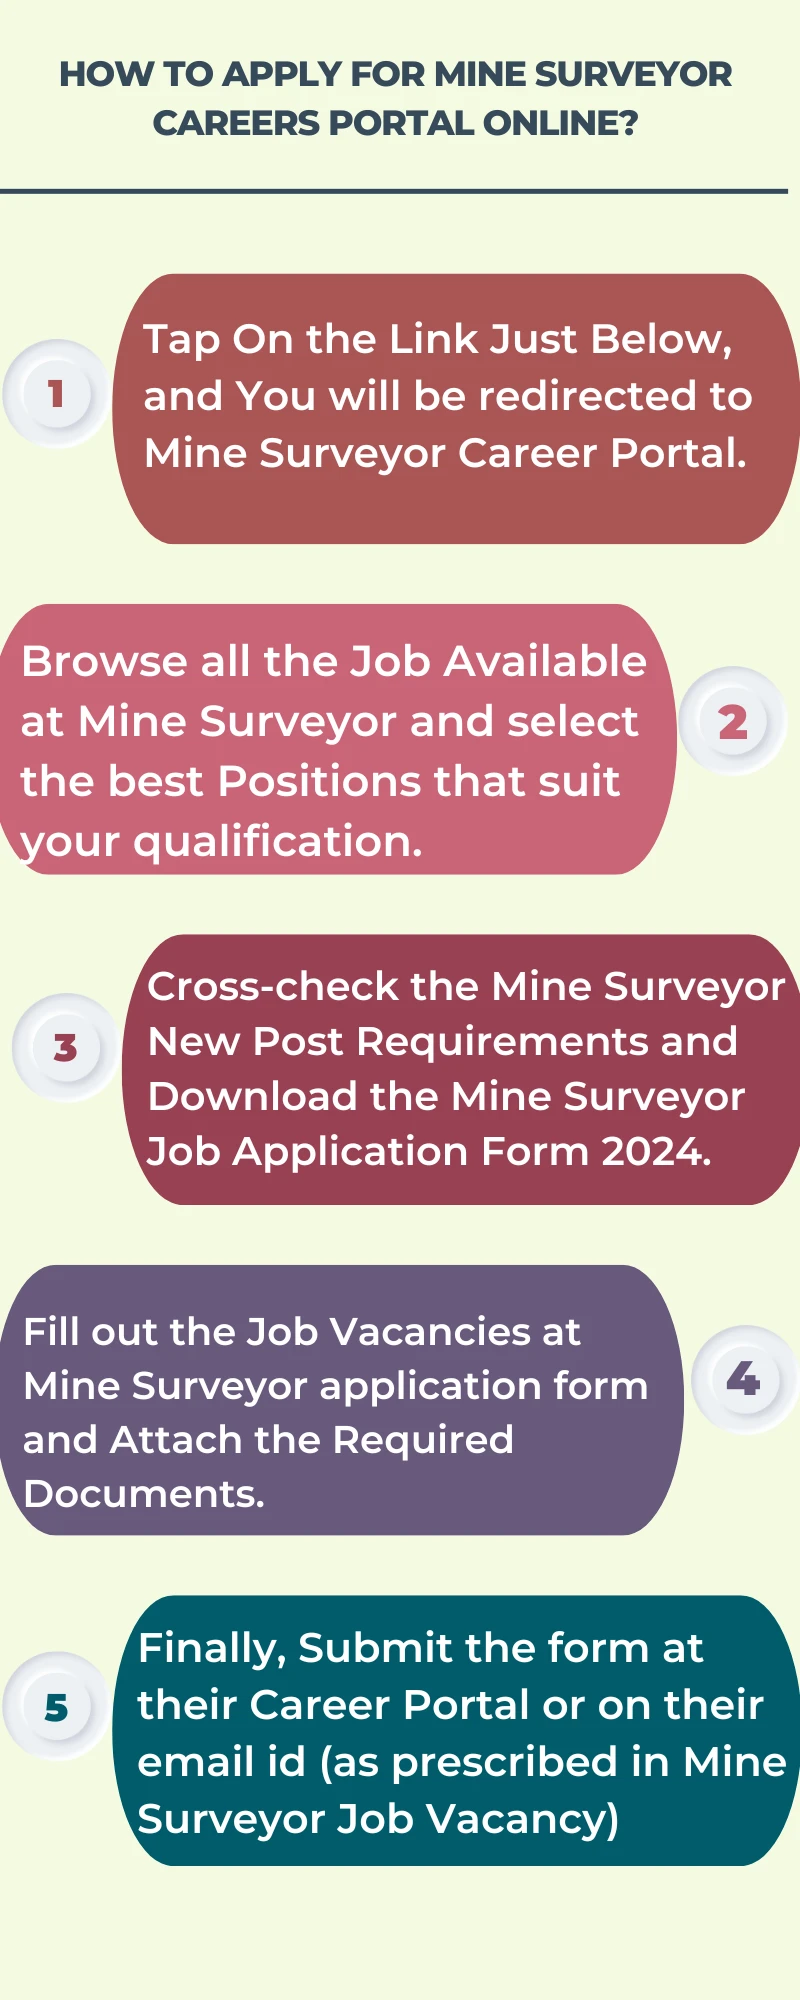 How To Apply for Mine Surveyor Careers Portal Online?